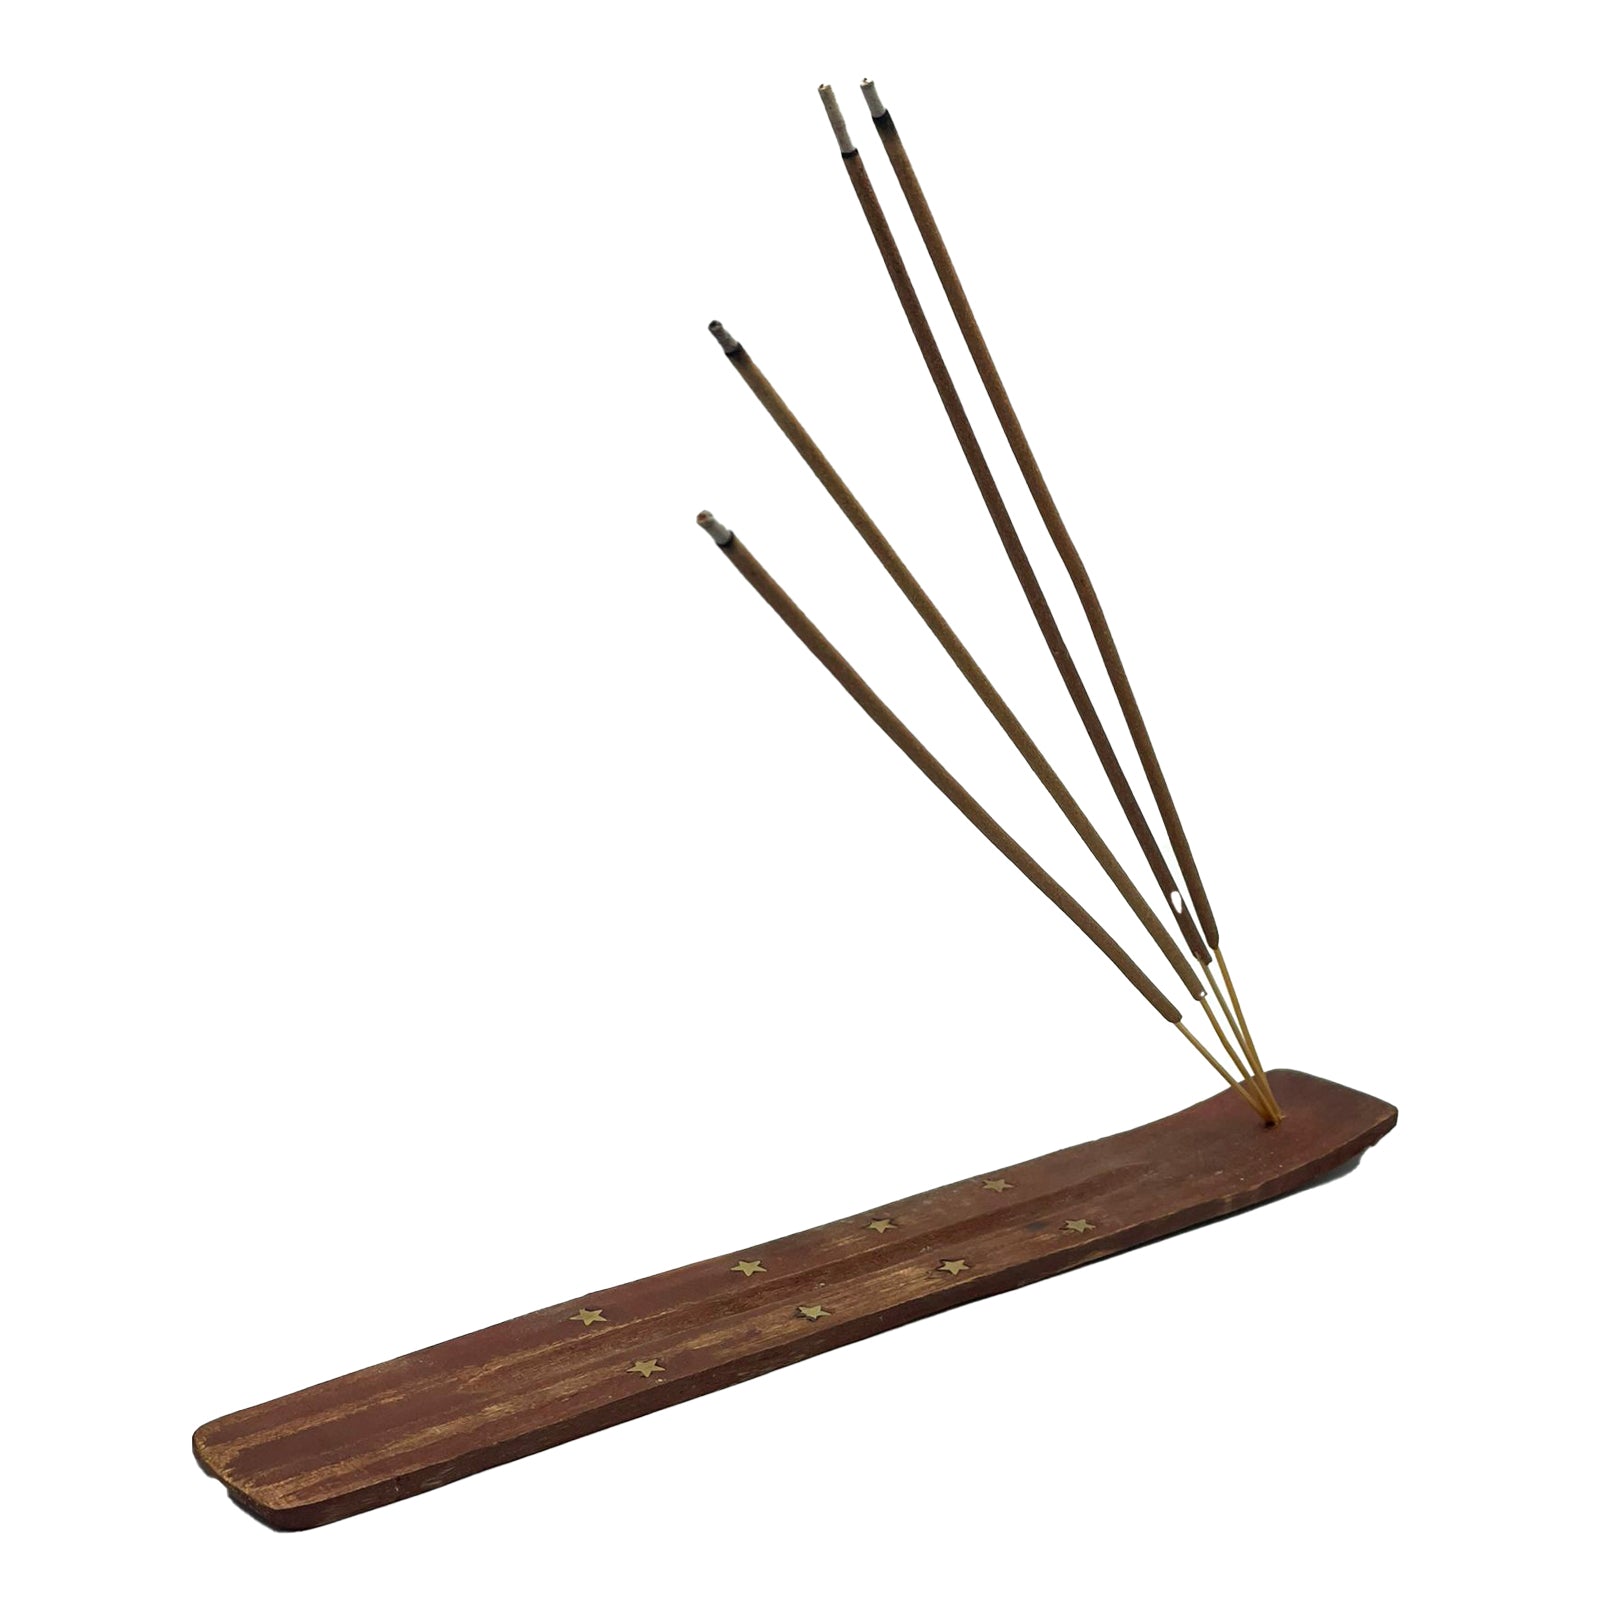 Pure Agarwood Incense Sticks with Wooden Holder (40 x 10”)